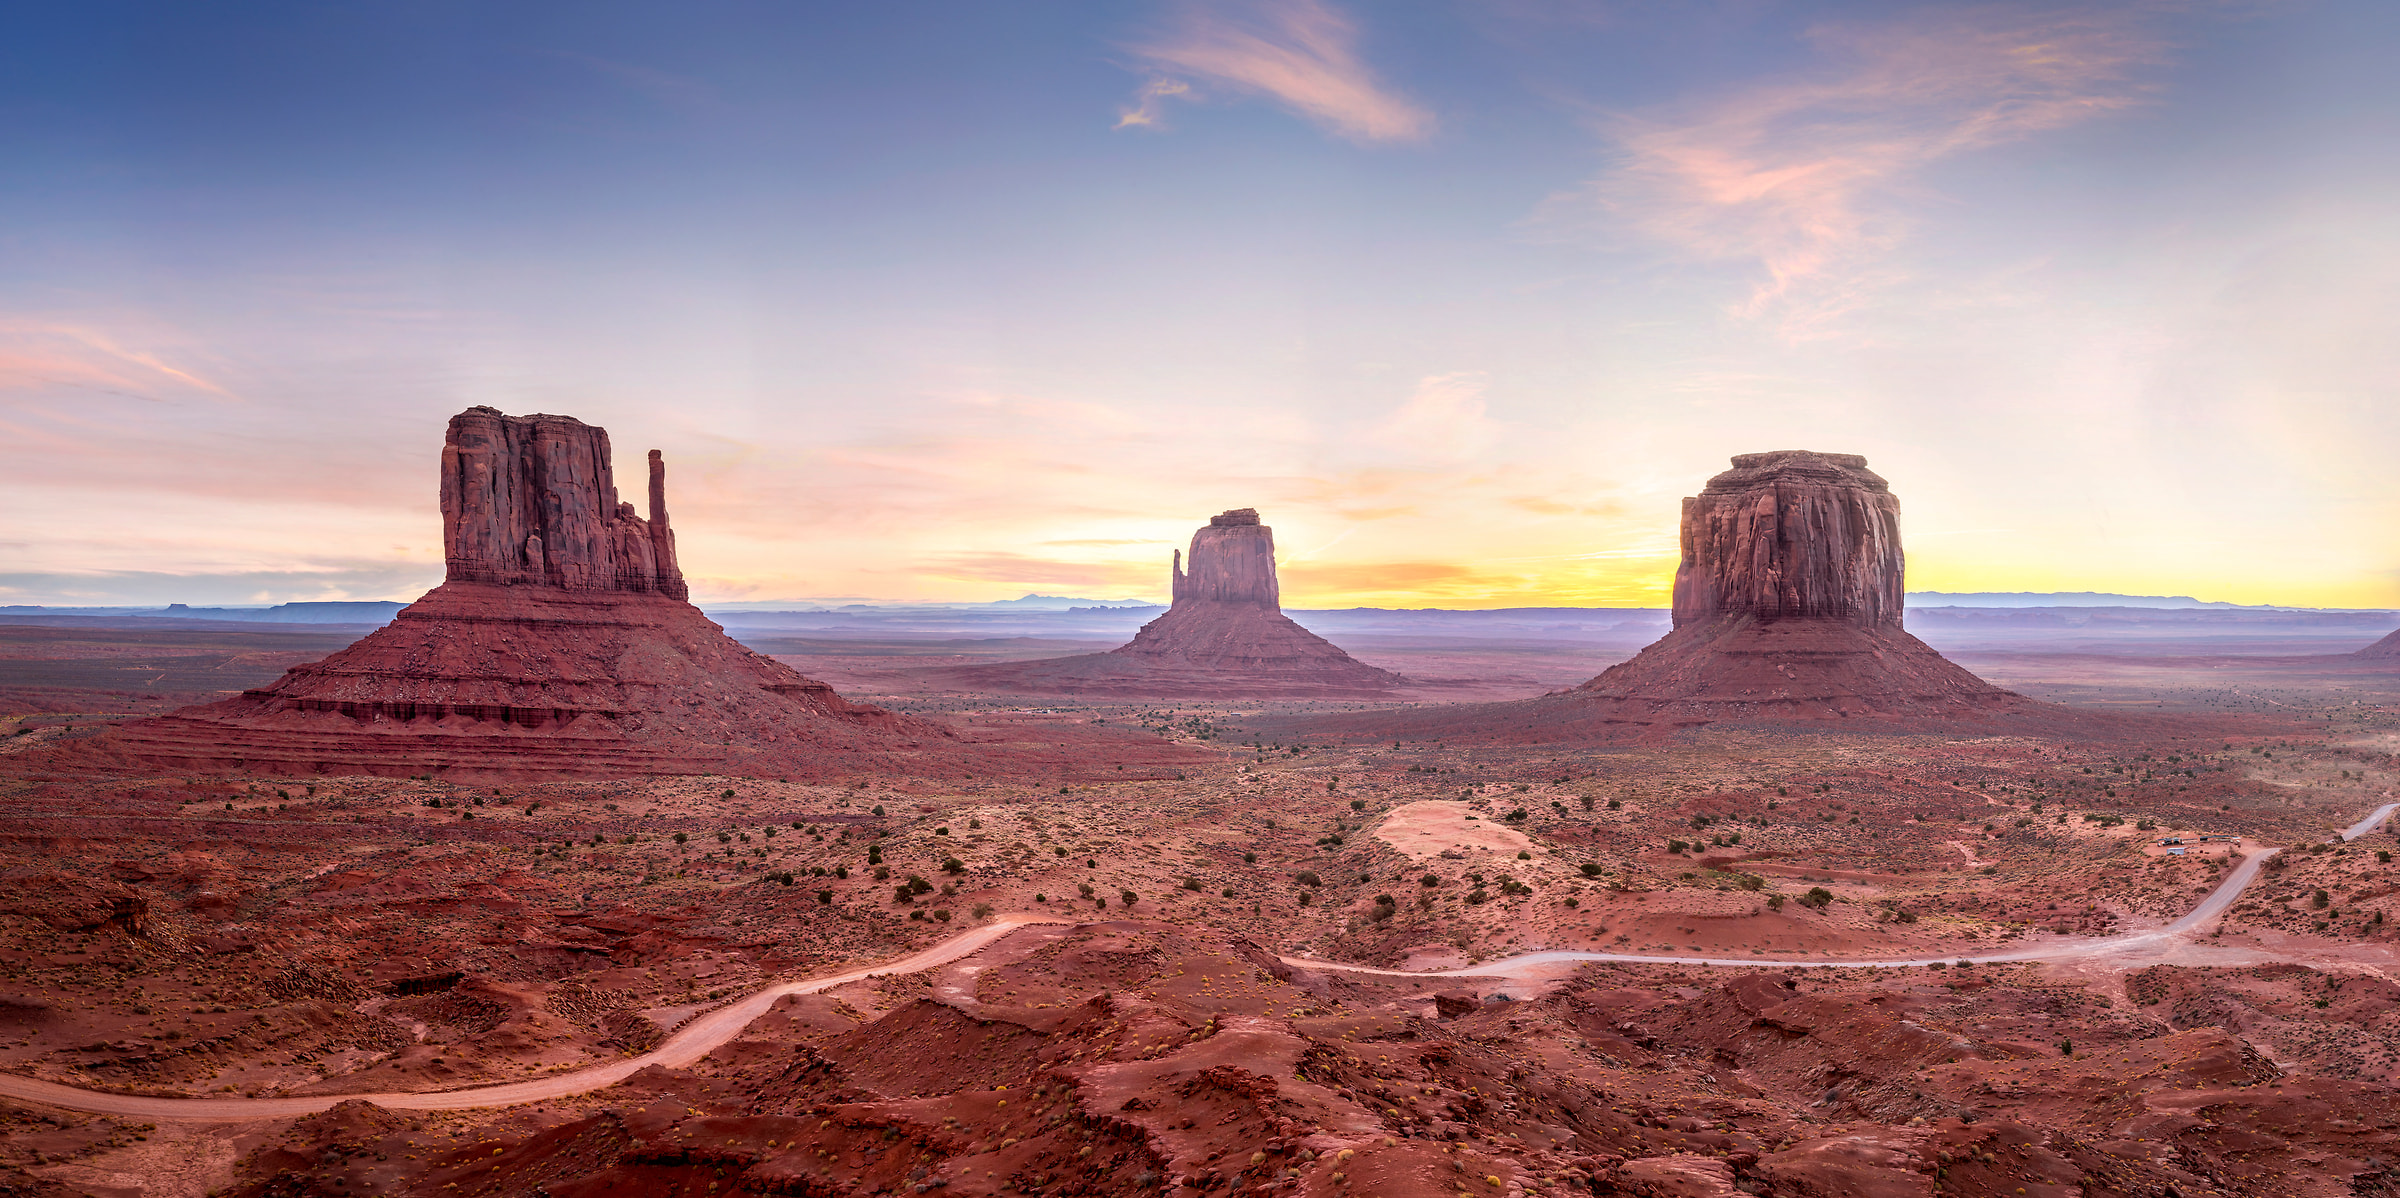 345 megapixels! A very high resolution, large-format VAST photo print of an American landscape scene from the western USA; photo created by Justin Katz in Monument Valley, Utah and Arizona.